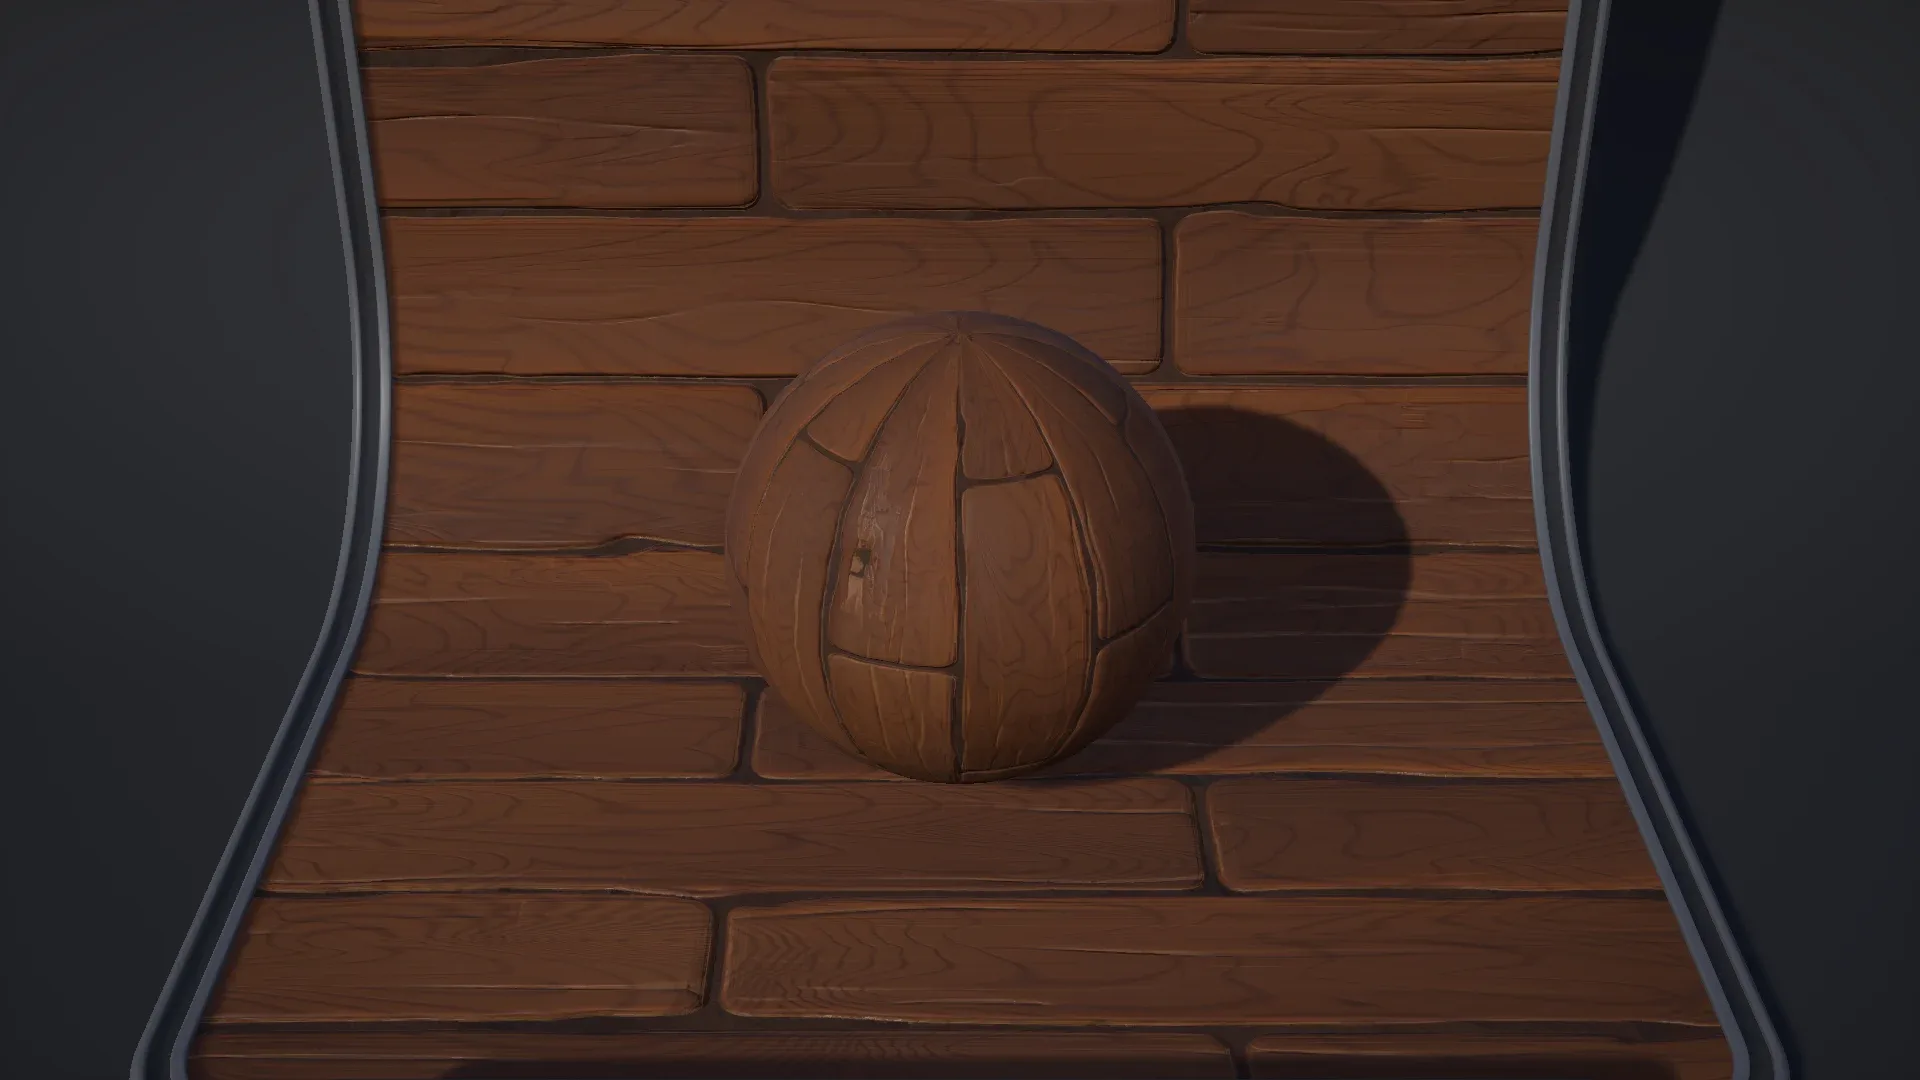 Stylized Materials Pack 01